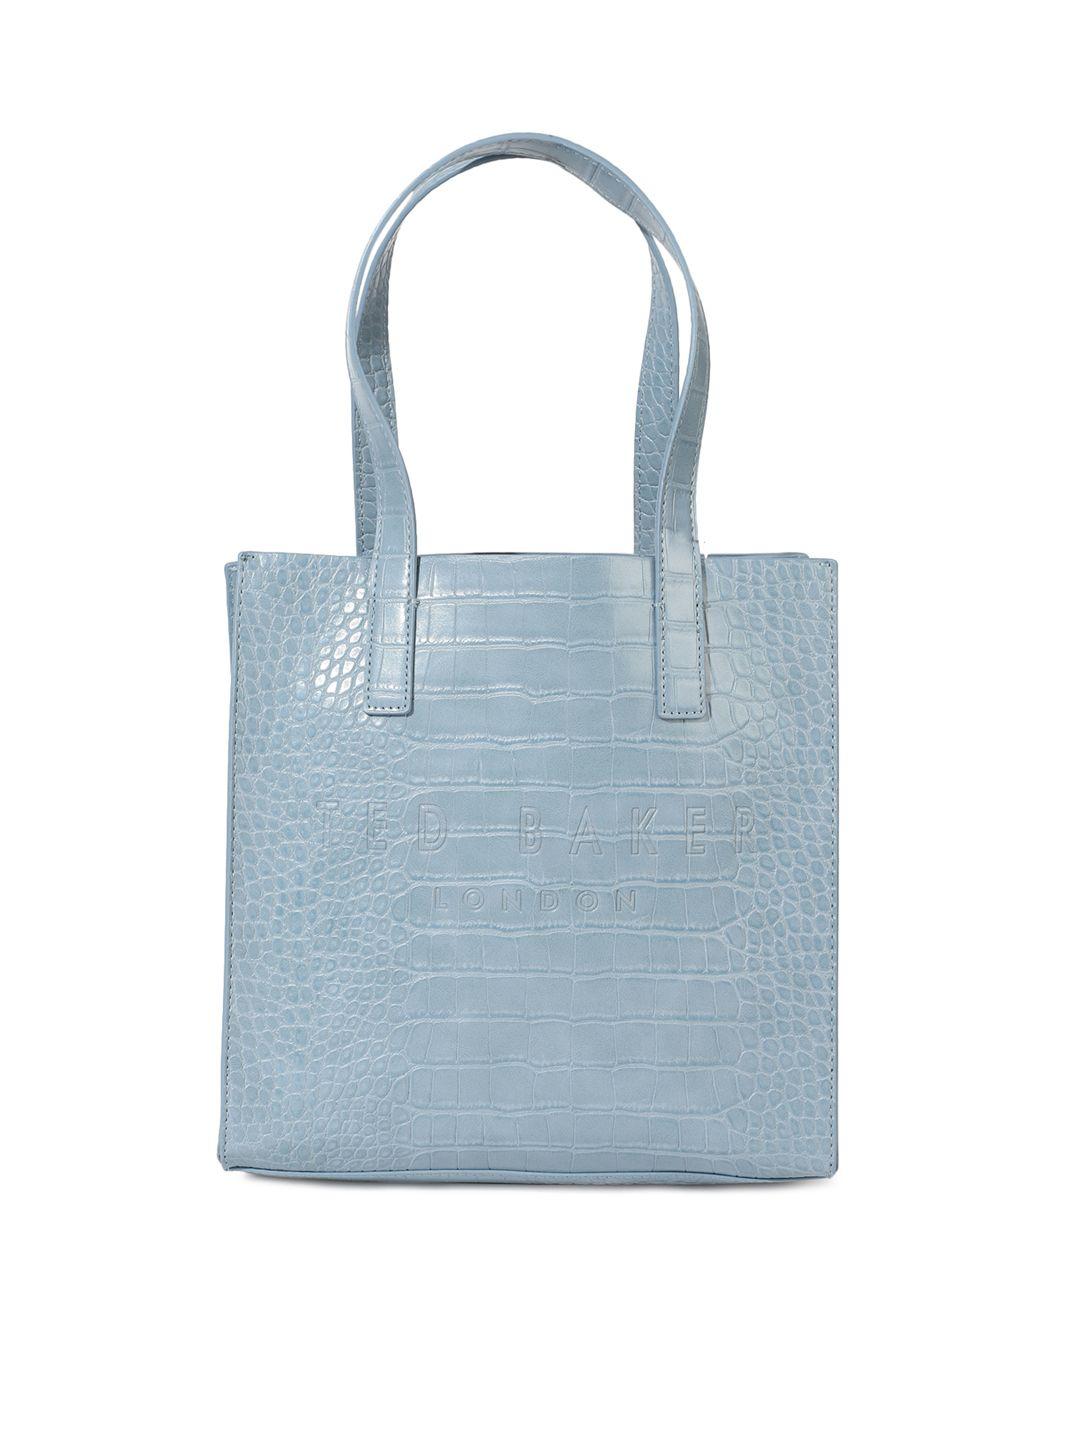 ted baker blue textured leather oversized shopper tote bag with quilted